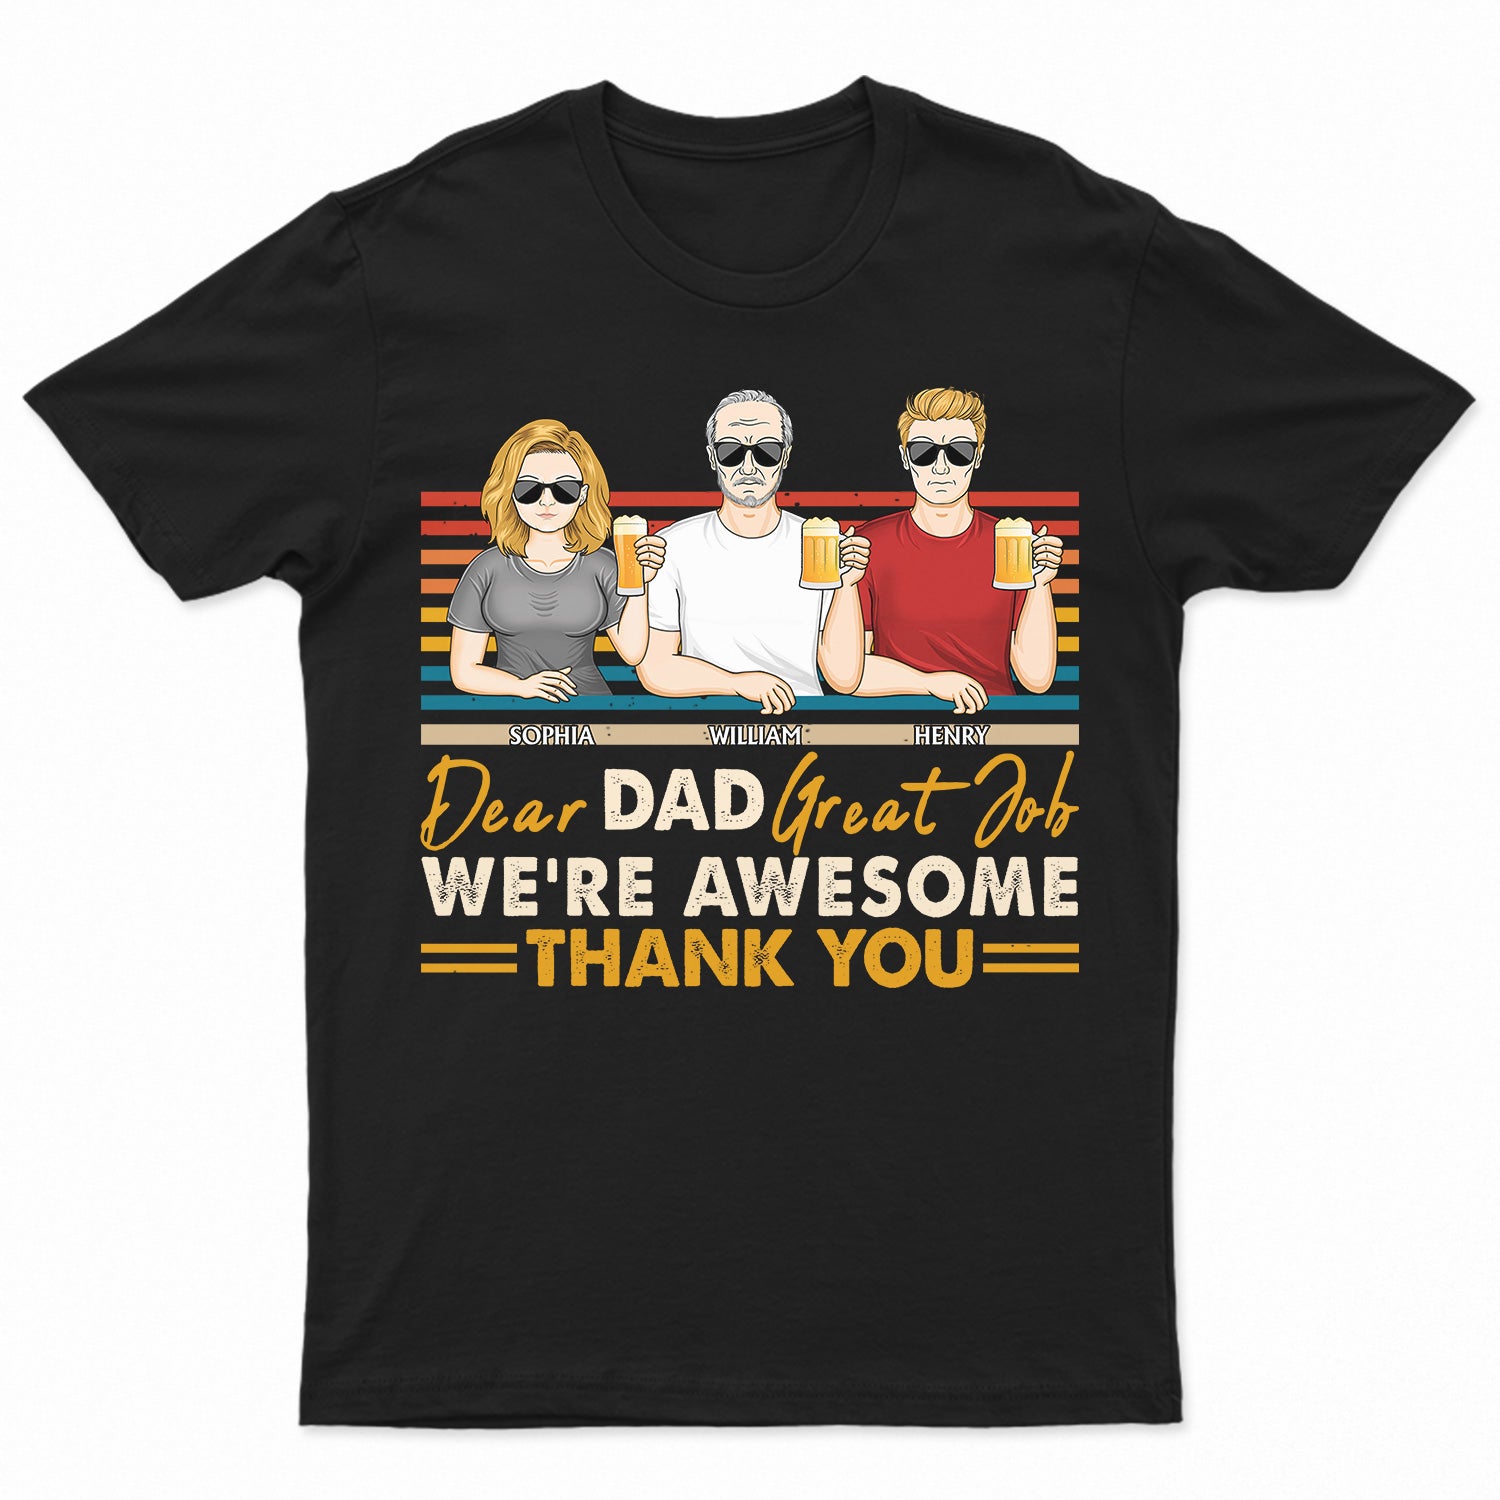 Dear Dad Great Job We're Awesome Thank You Retro - Funny, Birthday Gift For Father, Papa, Husband - Personalized Custom T Shirt